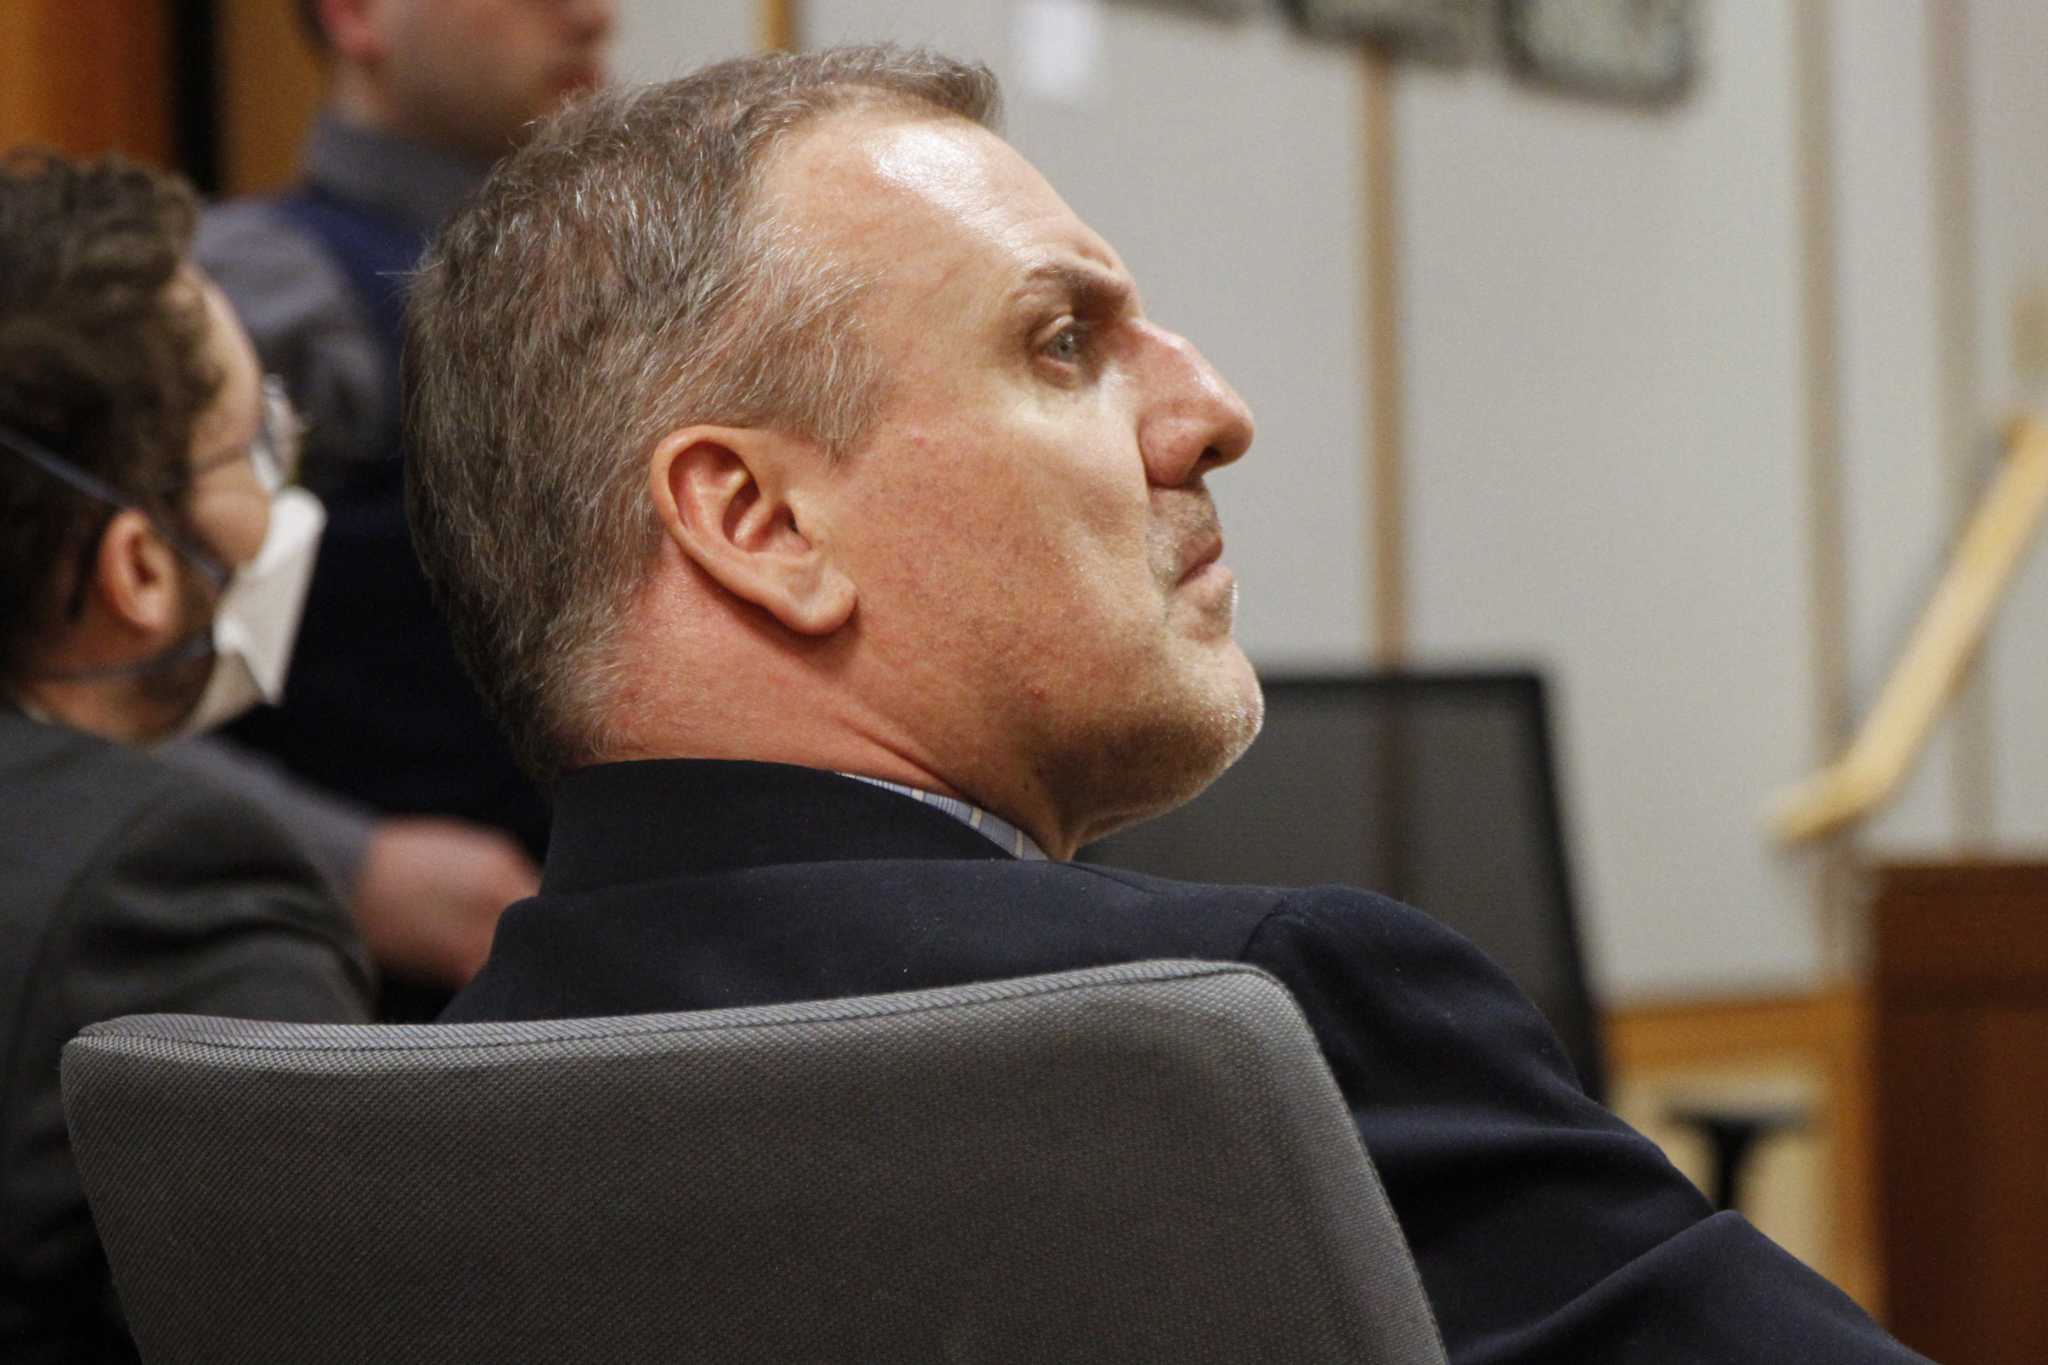 Man gets 226 years in deaths of 2 Alaska Native women. He filmed the torture of one